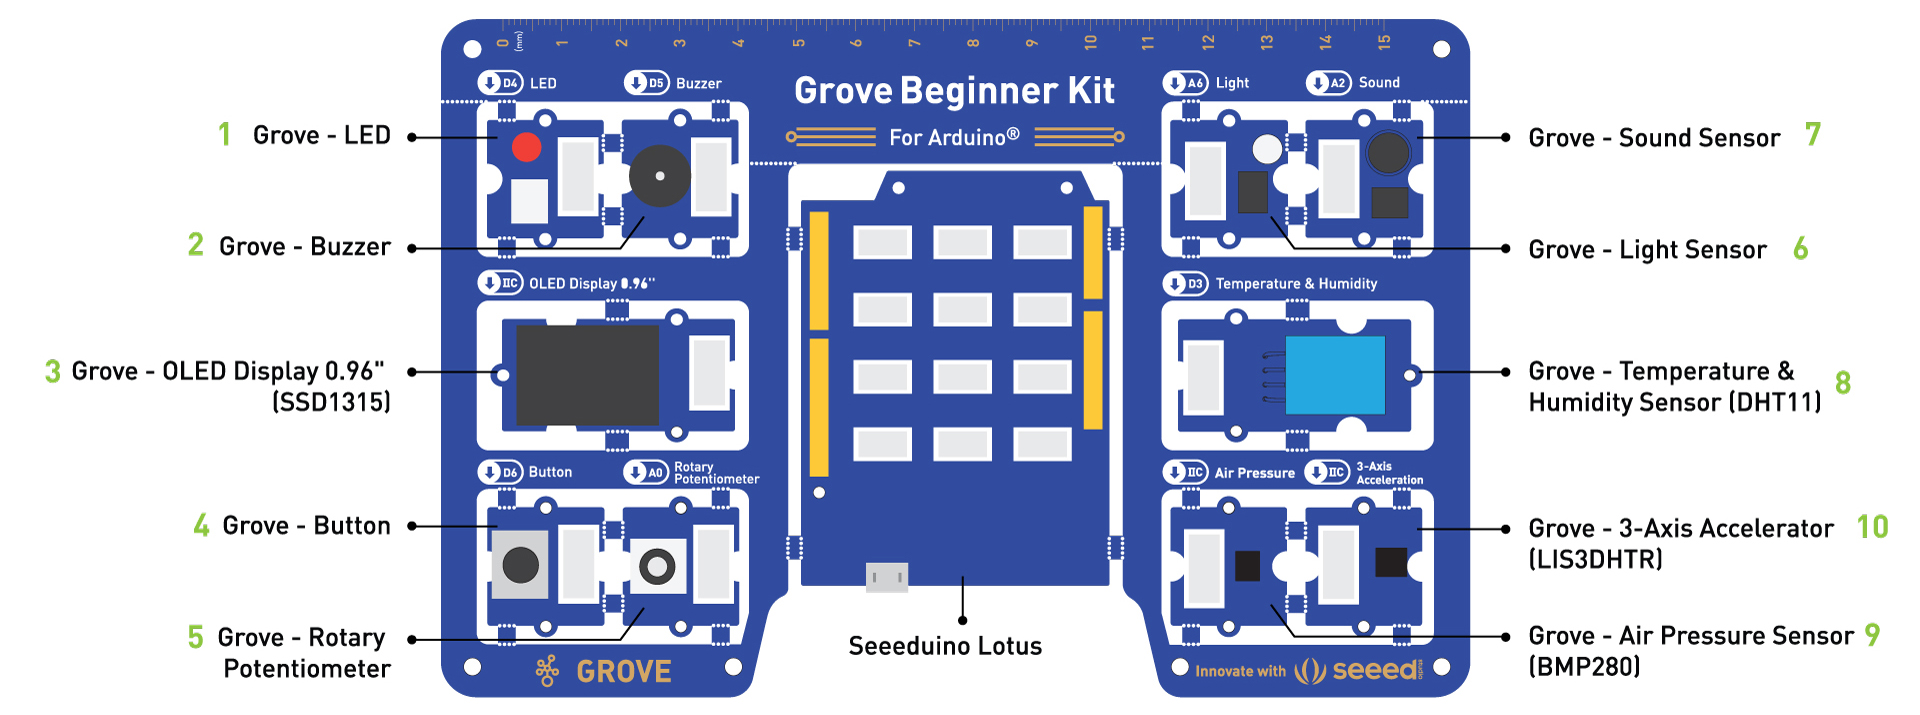 Grove Beginner Kit for Arduino All-in-One Compatible Board - Click to Enlarge